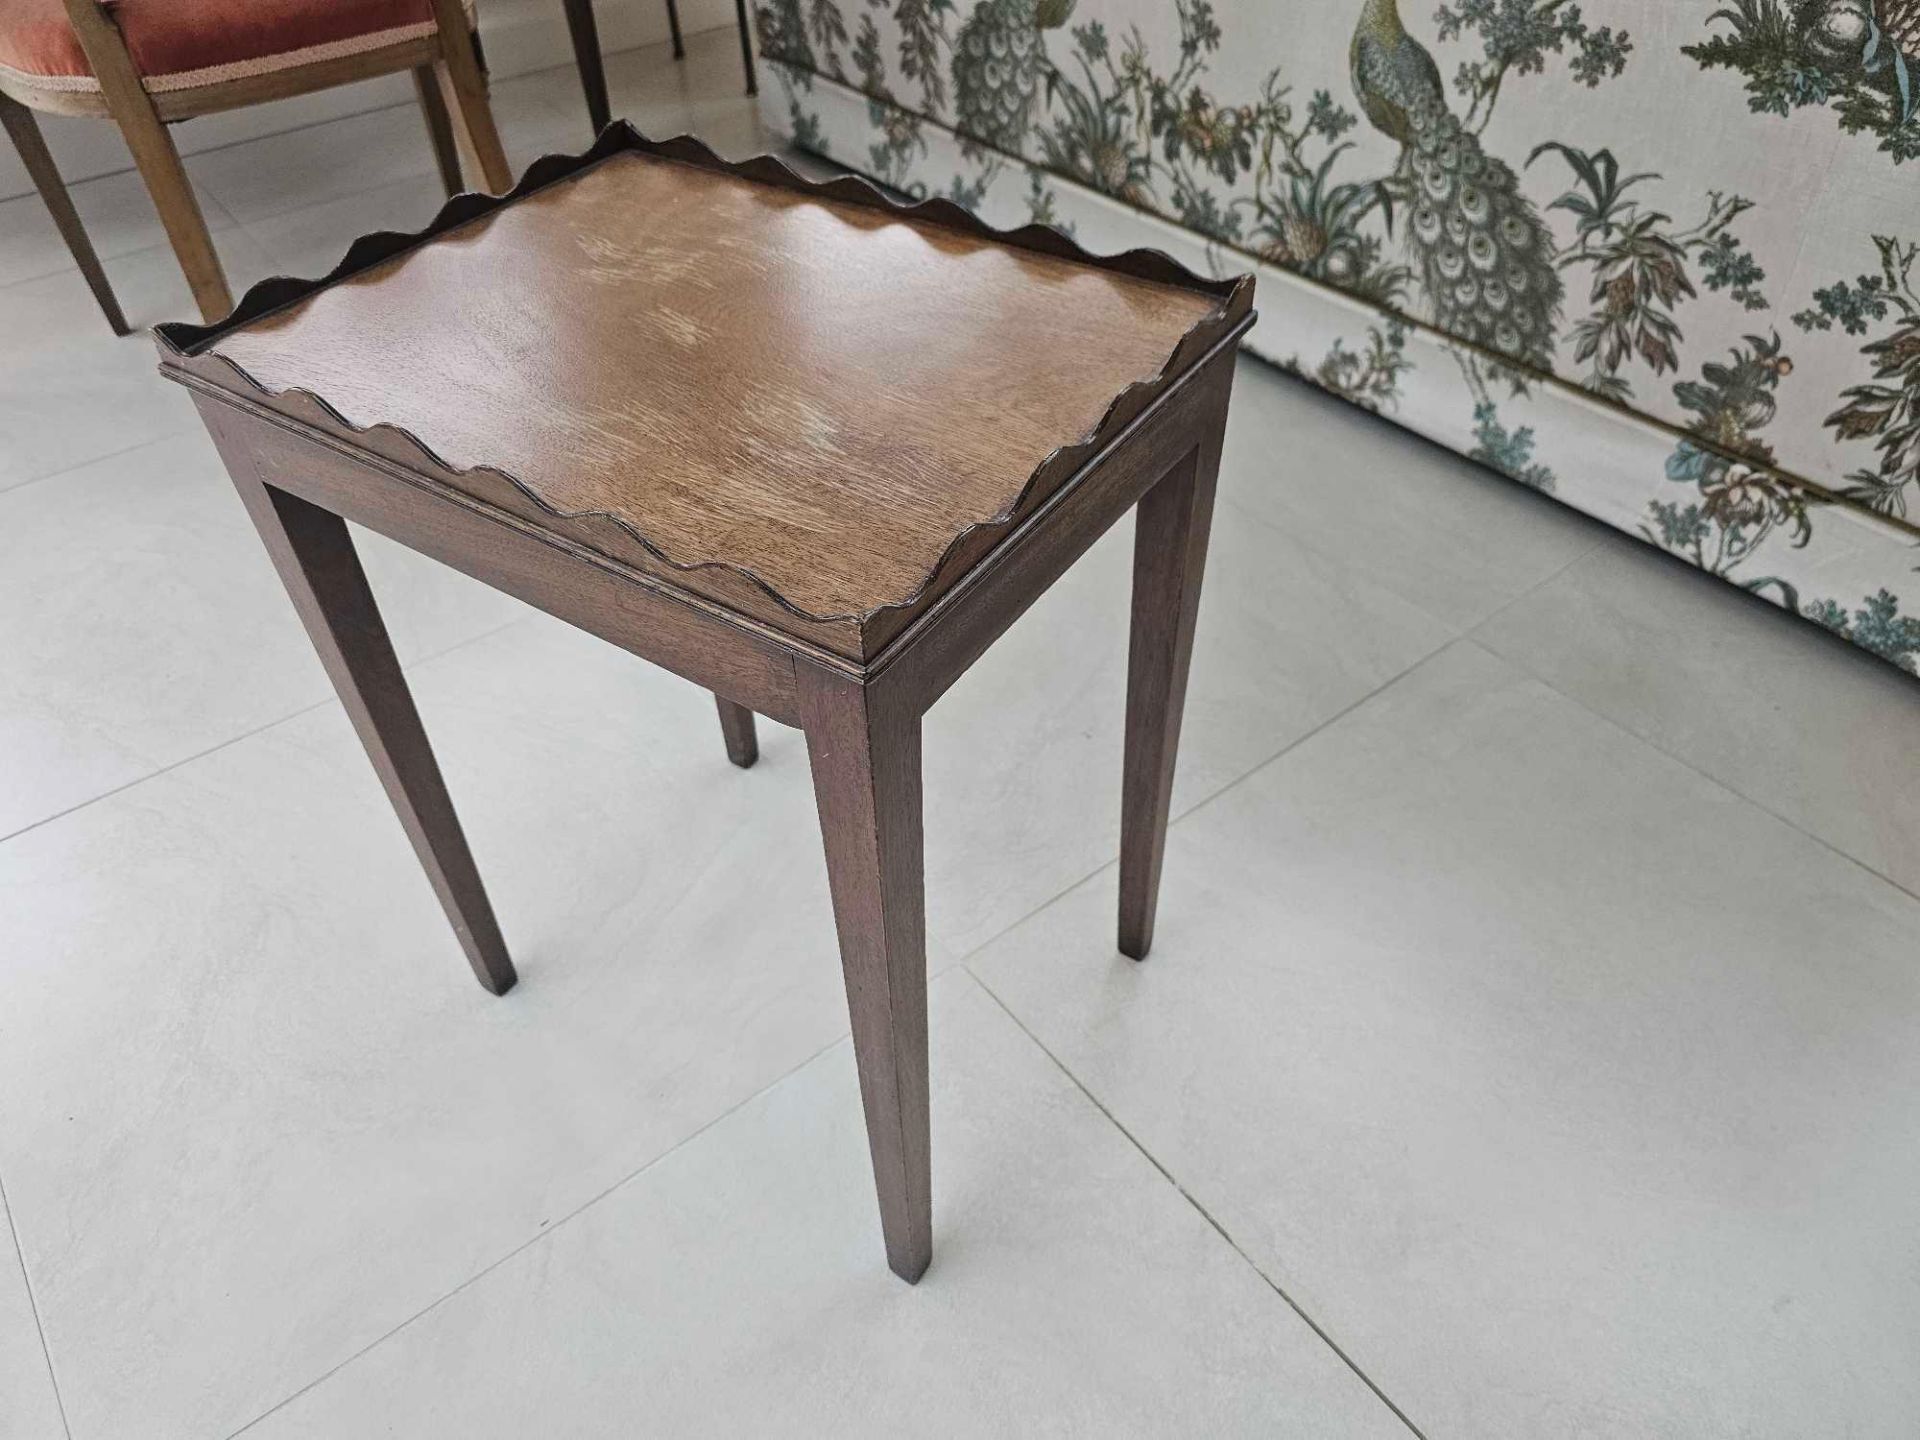 A Scalloped Edge Side Table Raised On Square Tapering Legs 42 X 32 X 52cm - Image 3 of 5